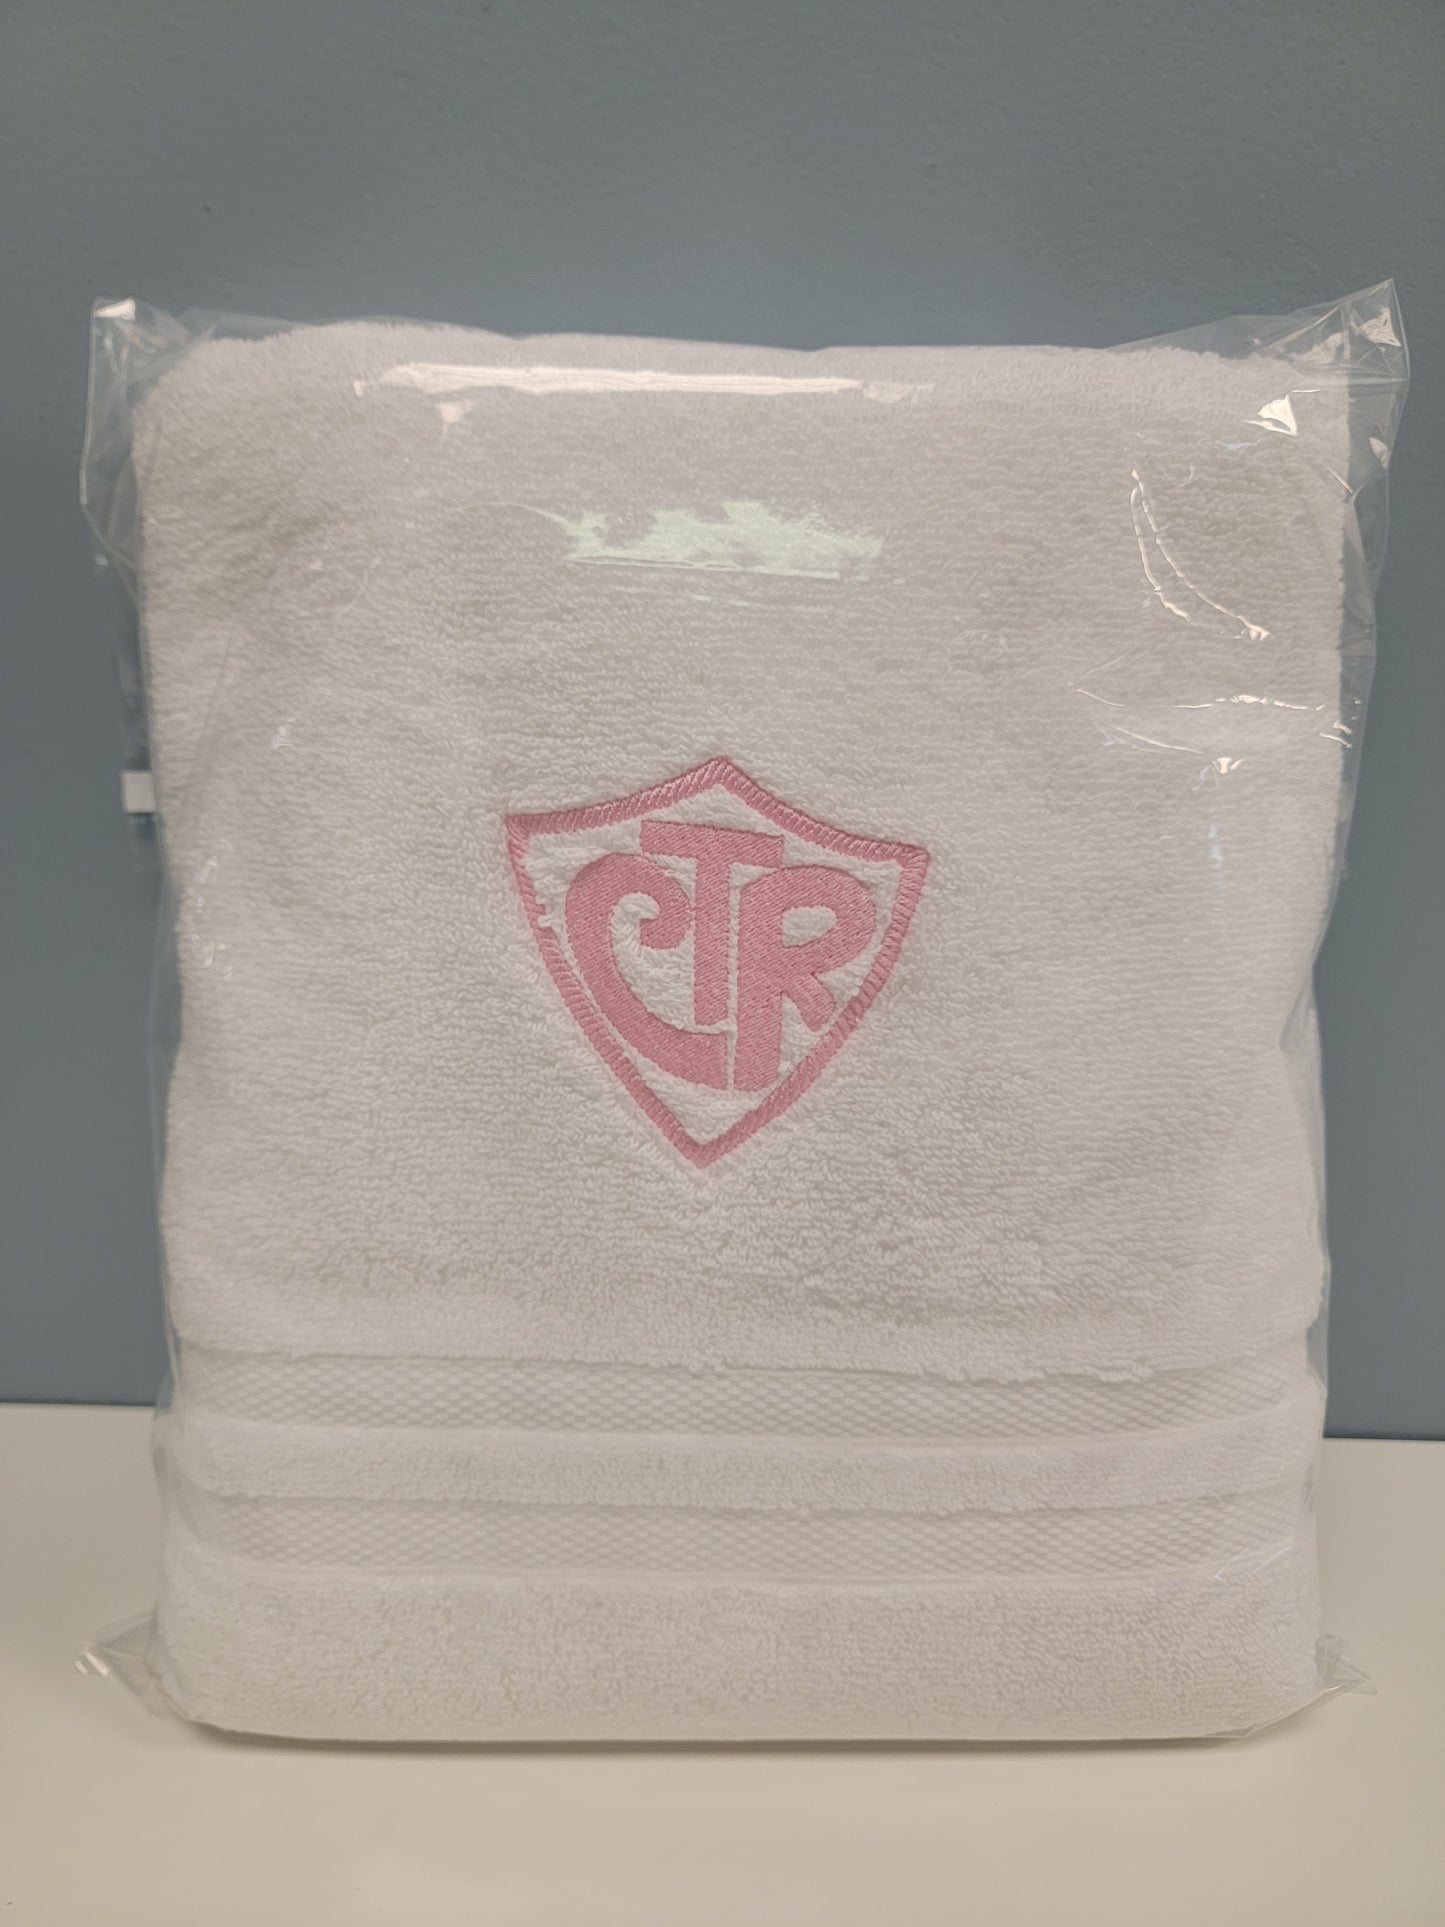 White baptism towel with embroidered CTR symbol